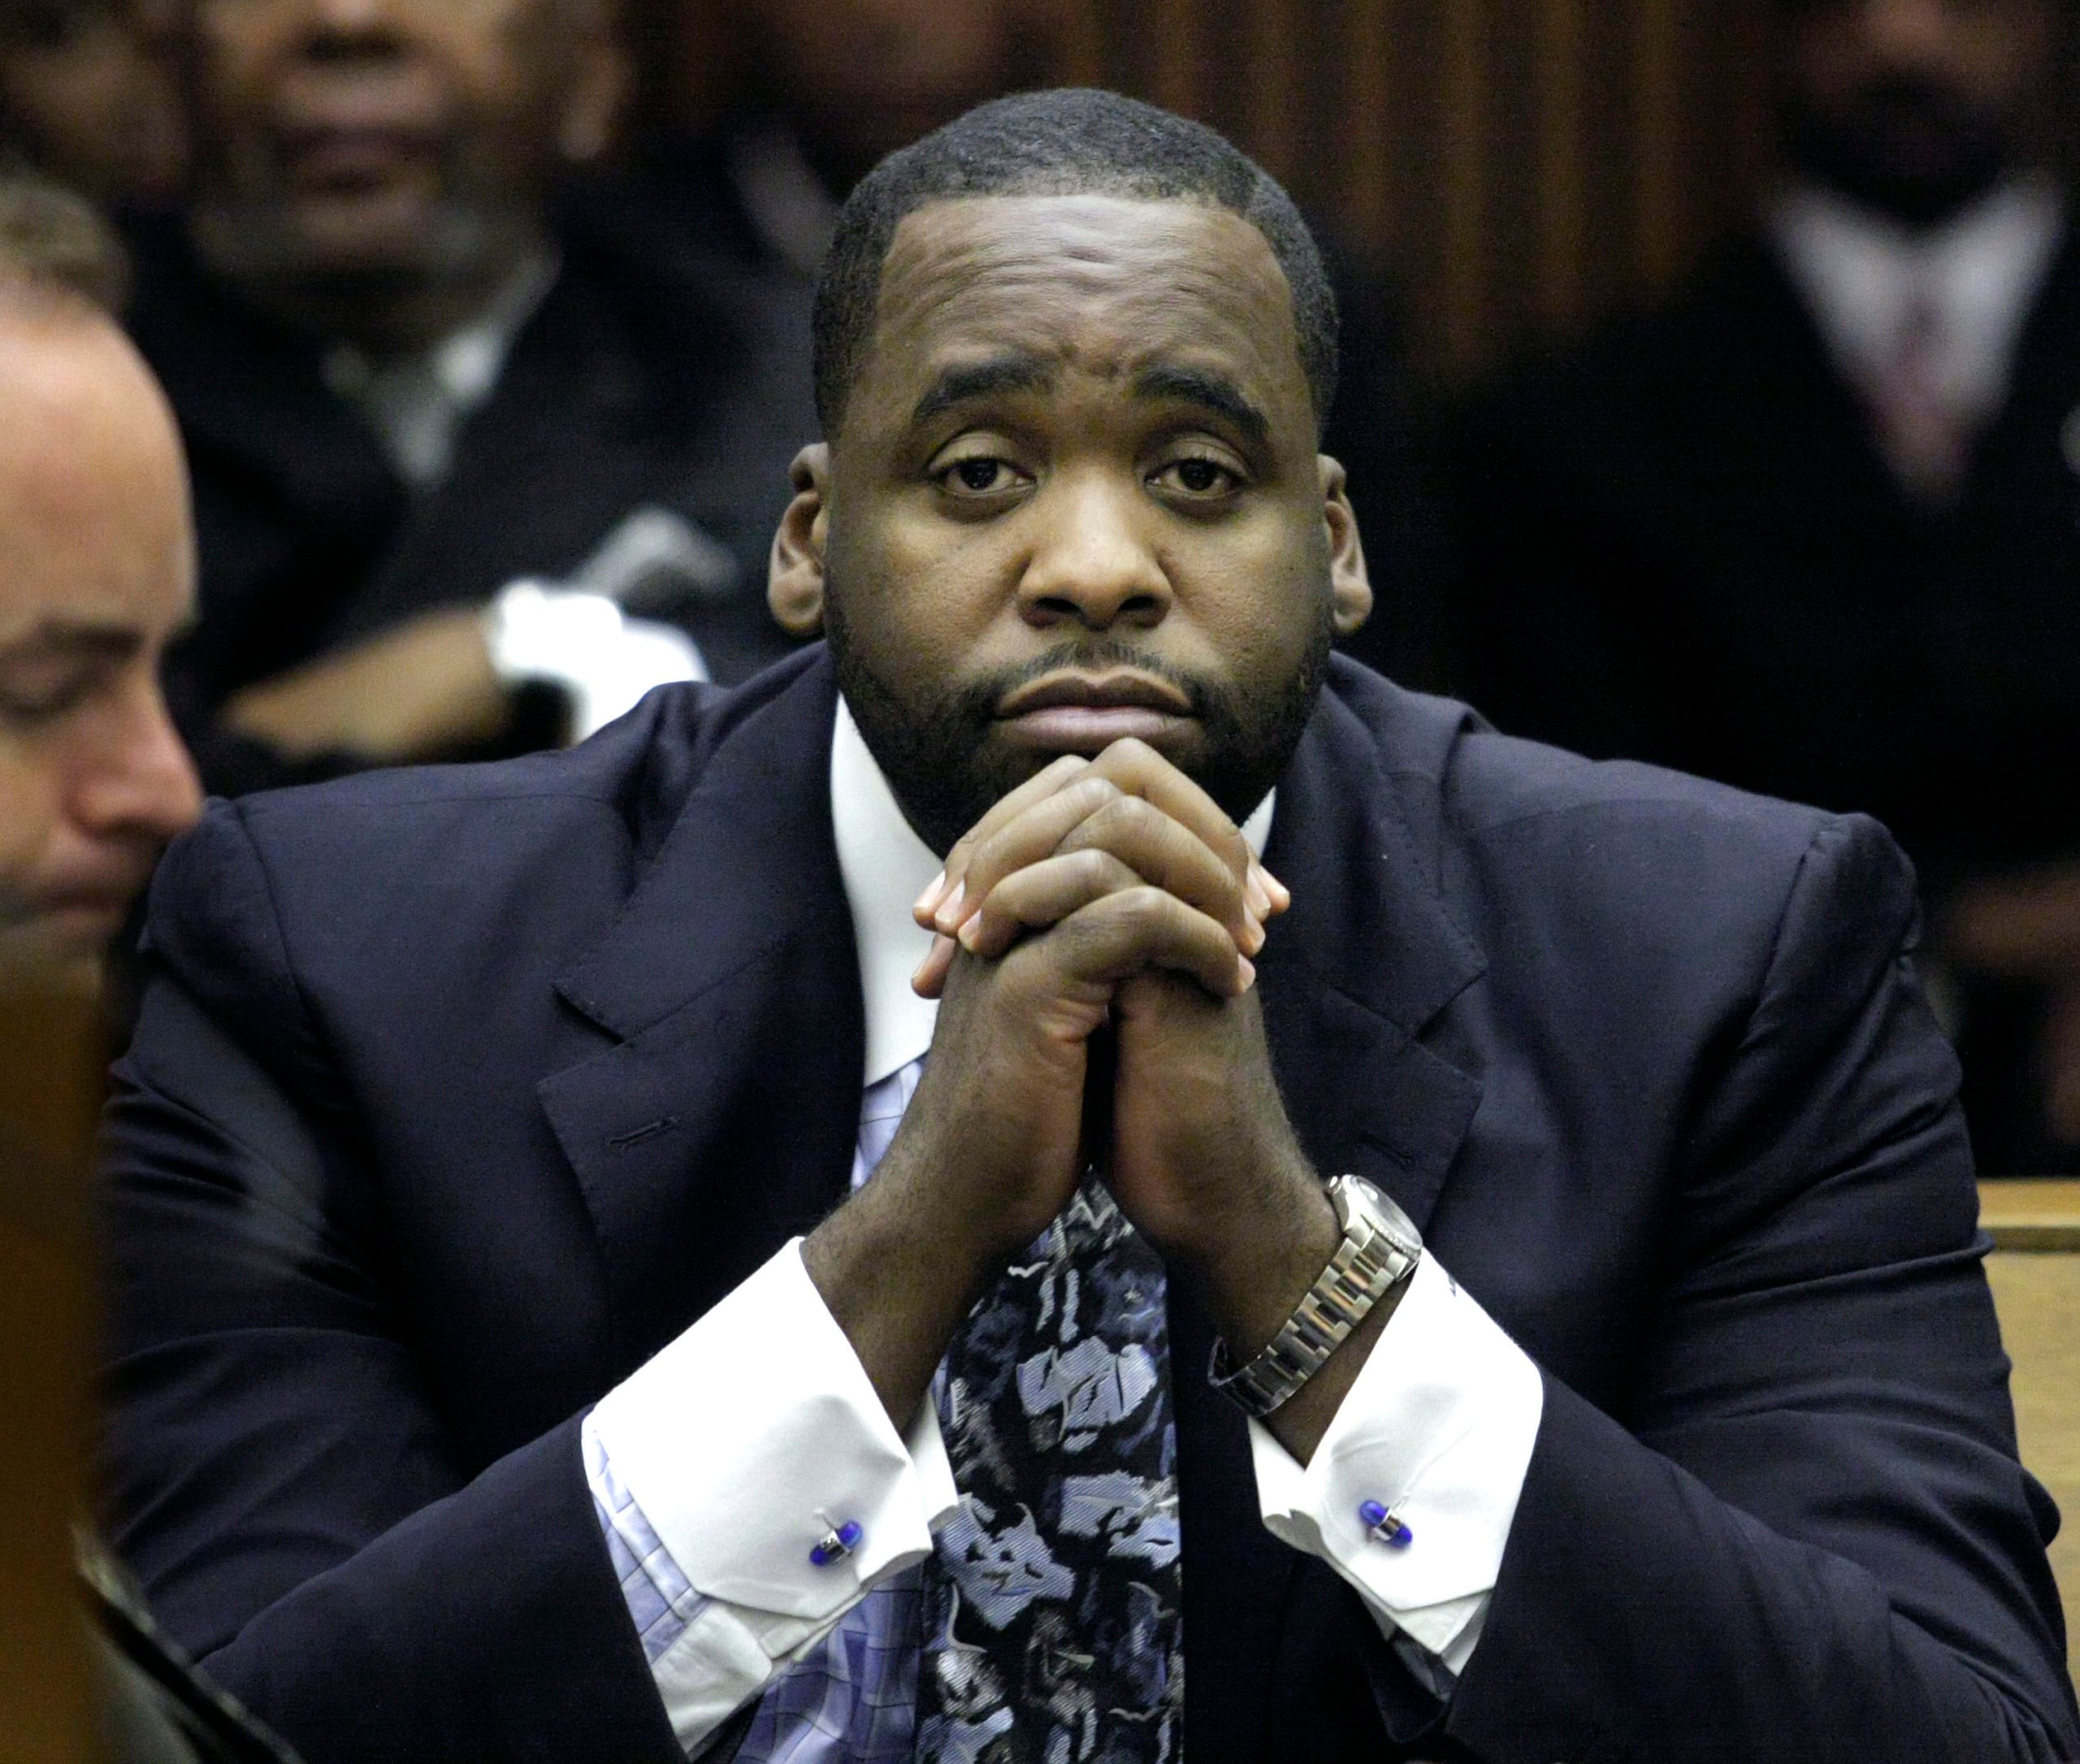 DETROIT - OCTOBER 28: Former Detroit Mayor Kwame Kilpatrick appears in Wayne County Circuit Court for his sentencing October 28, 2008 in Detroit, Michigan. Kilpatrick will spend 4 months in jail as part of a plea deal he accepted back in September in which he plead guilty to two felonies and no contest to a felony assault charge. (Photo by Bill Pugliano/Getty Images)